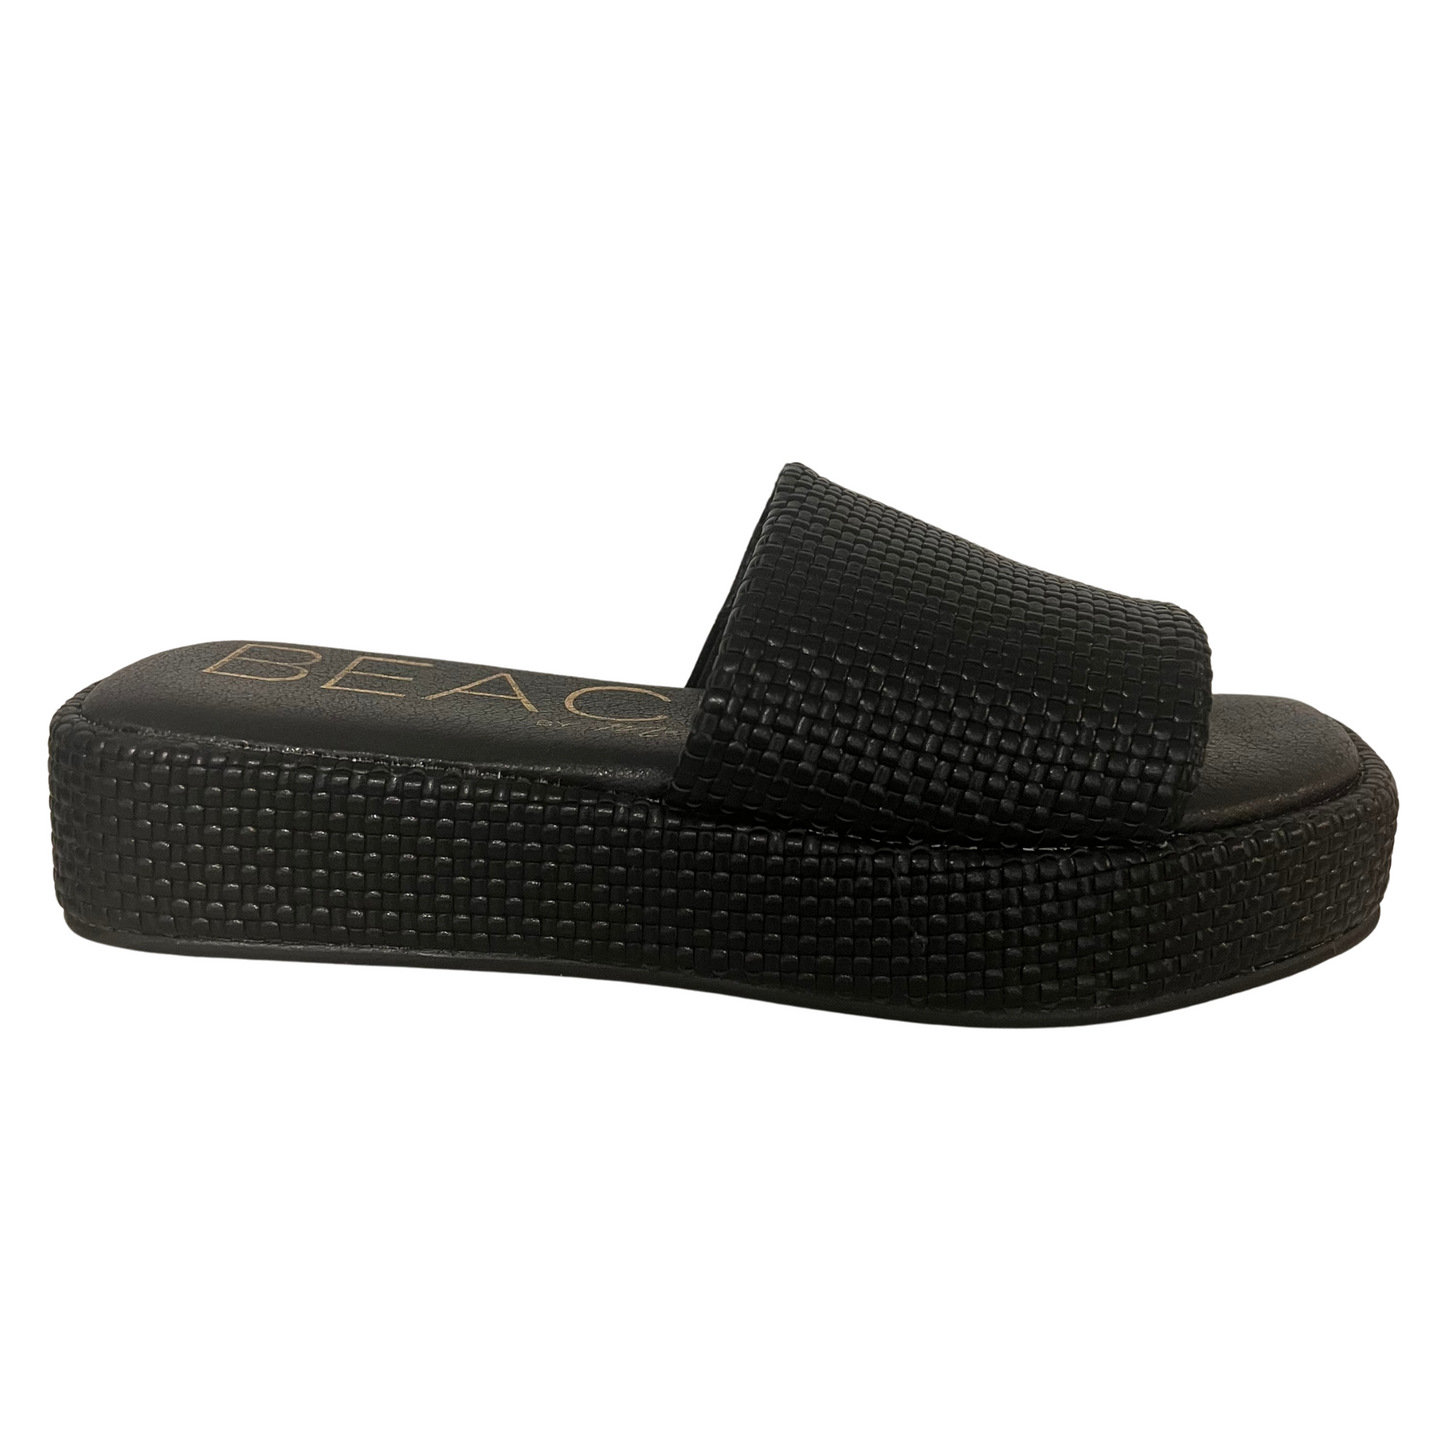 Maui sandals offer effortless elegance and comfort in a sleek and modern design. Crafted with a slide-on design, these fashionable sandals feature a black color and provide a secure, comfortable fit with every step.